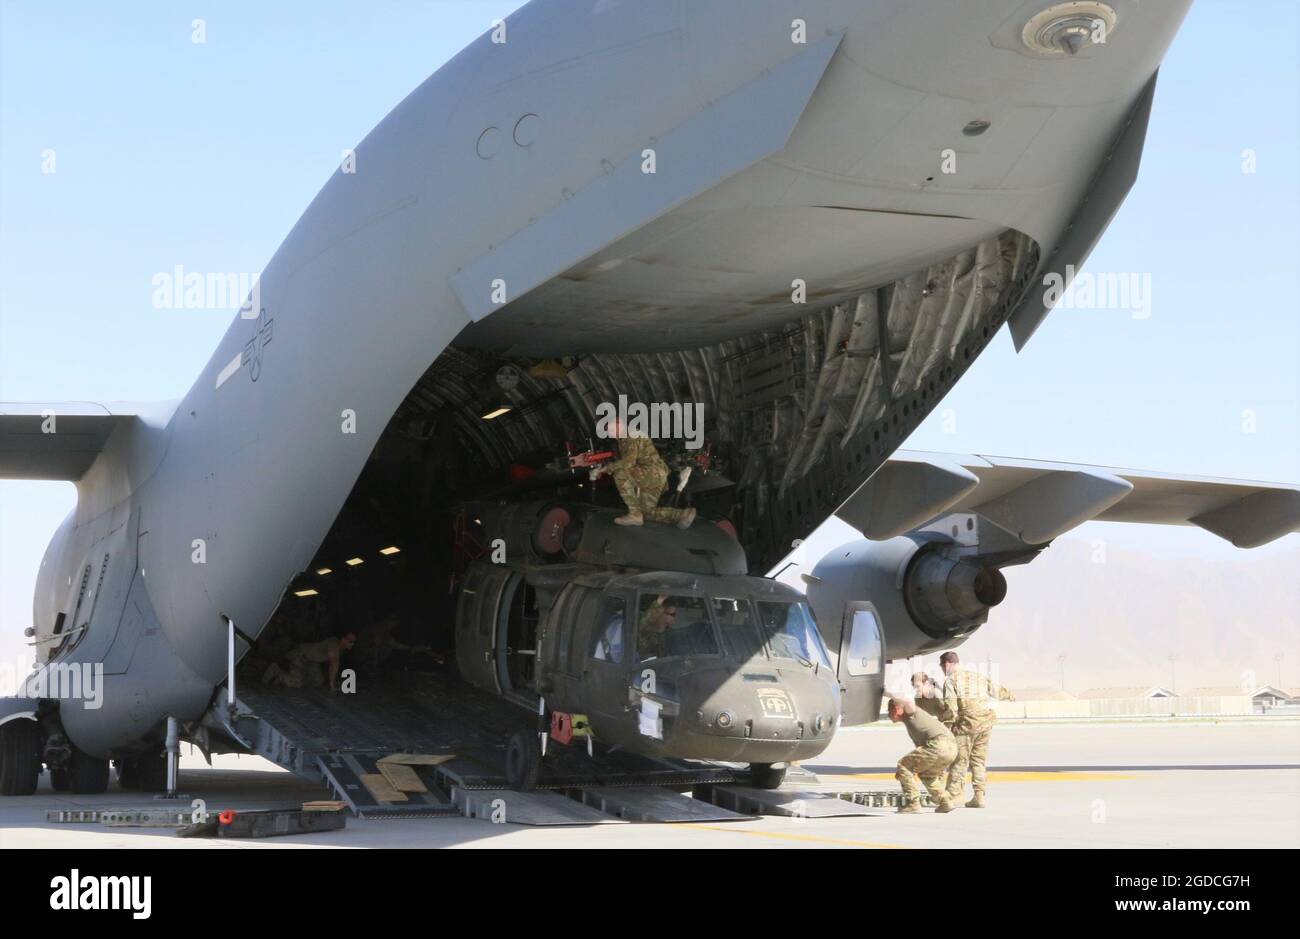 Aerial porters work with maintainers to load a UH-60L Blackhawk helicopter into a C-17 Globemaster III in support of the Resolute Support retrograde mission in  Afghanistan, June 16, 2021. (U.S. Army photo by Sgt. 1st Class Corey Vandiver/DVIDS via Sipa USA) Please note: Fees charged by the agency are for the agency’s services only, and do not, nor are they intended to, convey to the user any ownership of Copyright or License in the material. The agency does not claim any ownership including but not limited to Copyright or License in the attached material. By publishing this material you expre Stock Photo